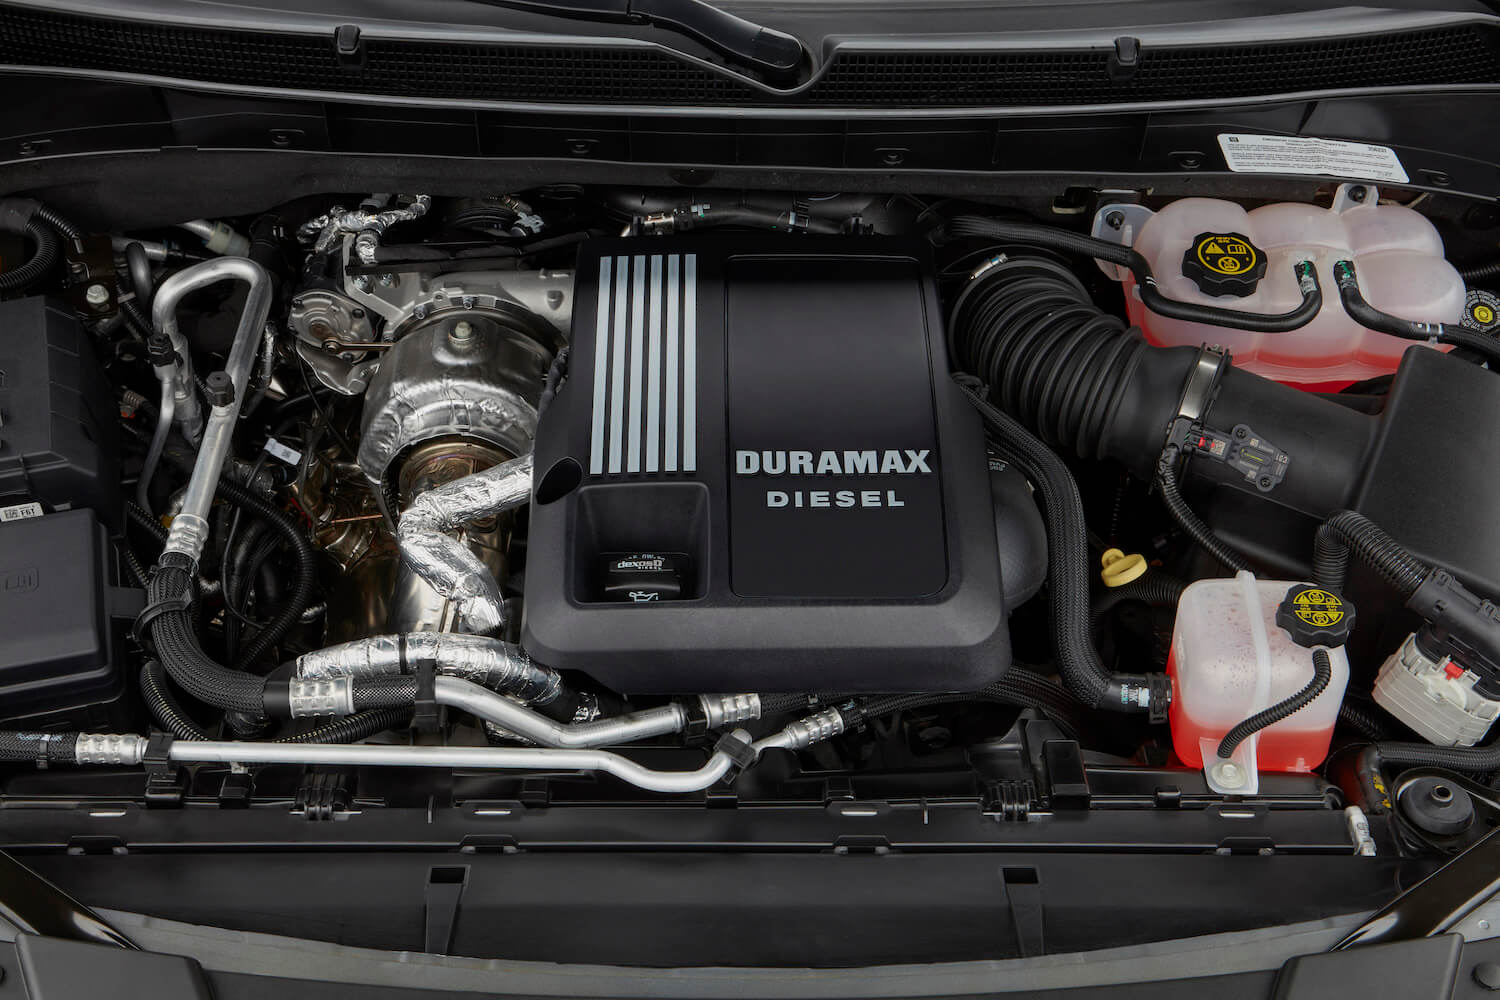 The Duramax 3.0-liter I6 diesel engine is reliable under the hood of a 2021 Cadillac Escalade SUV